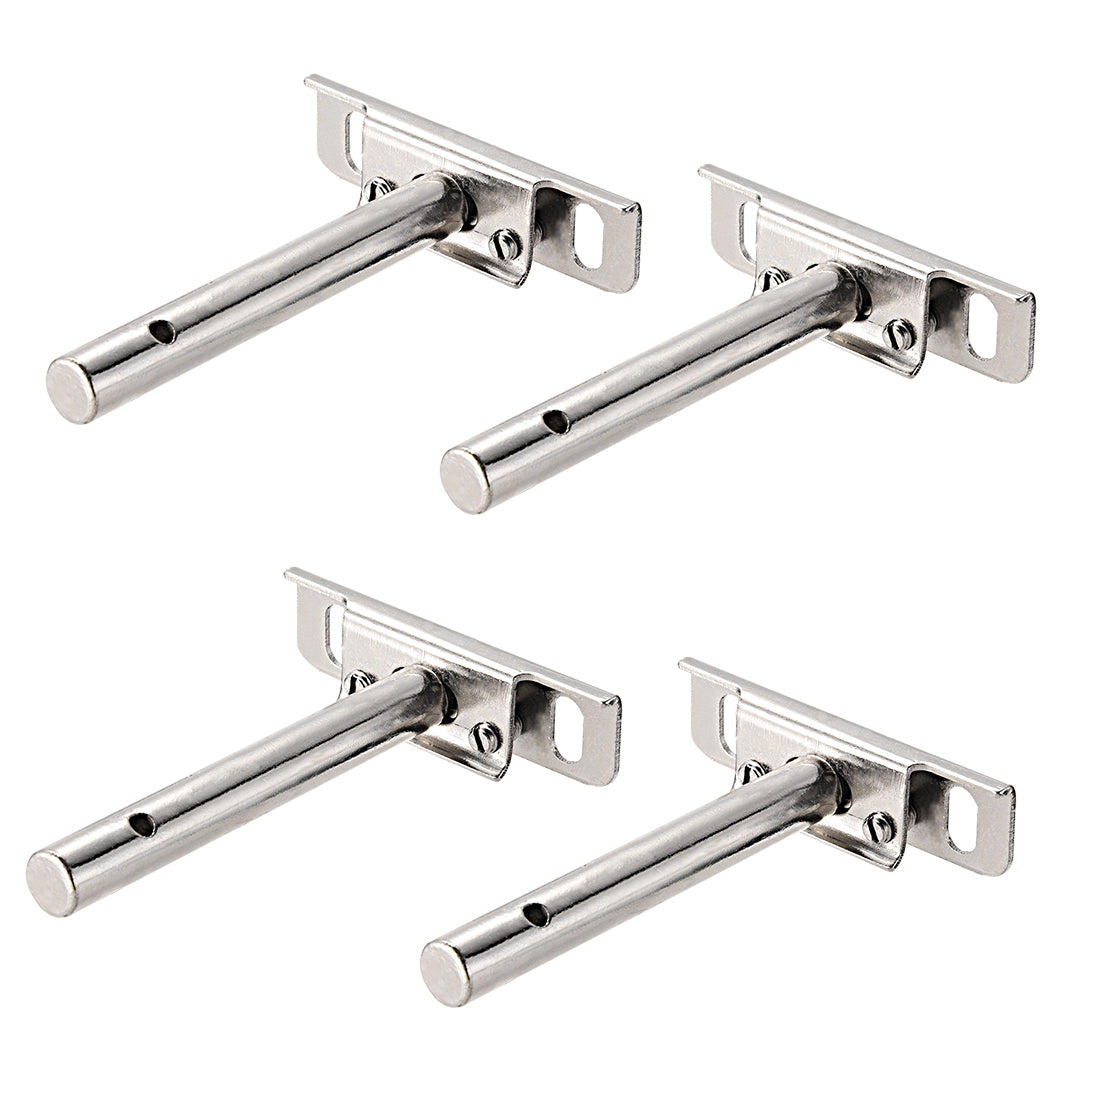 uxcell Uxcell 4 pcs 76mm x 100mm Adjustable Blind Shelf Floating Support Invisible Brackets, Concealed Mount for Home Wall DIY Silver Tone